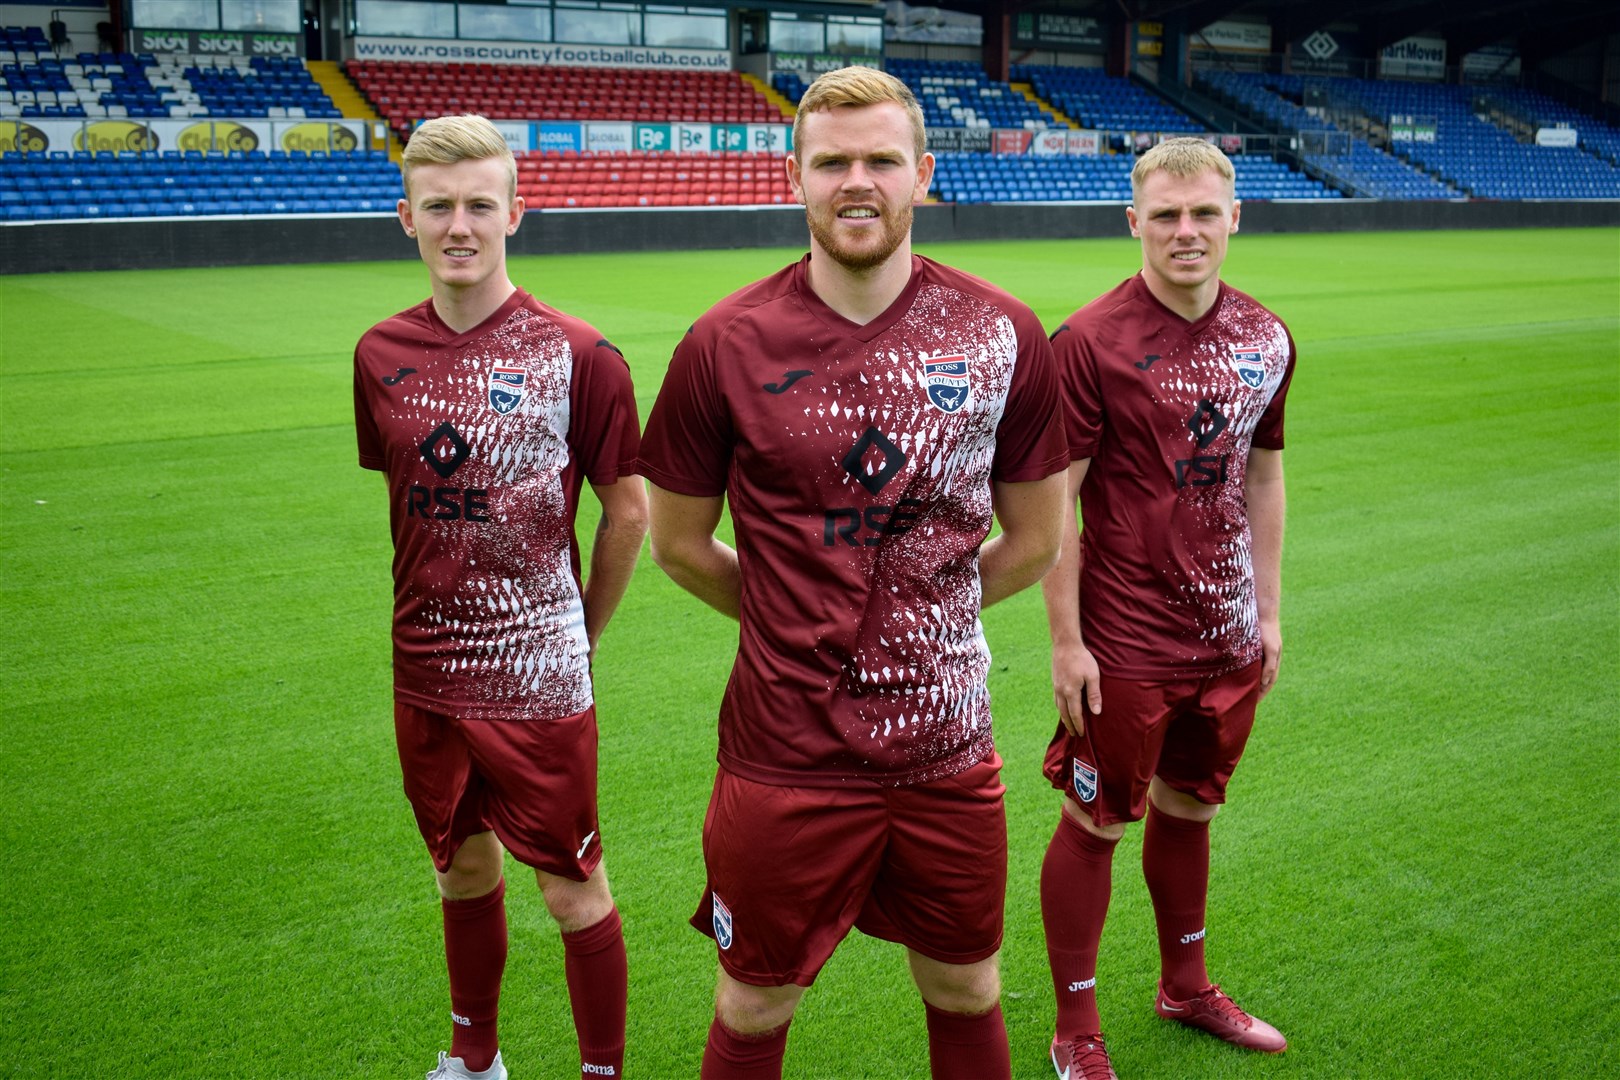 Ross County have launched their new away kit for the 2023/24 season. Modelling the new kit in Dingwall this week were three of the Staggies' summer recruits – Scott Allardice, Kyle Turner and Josh Reid.